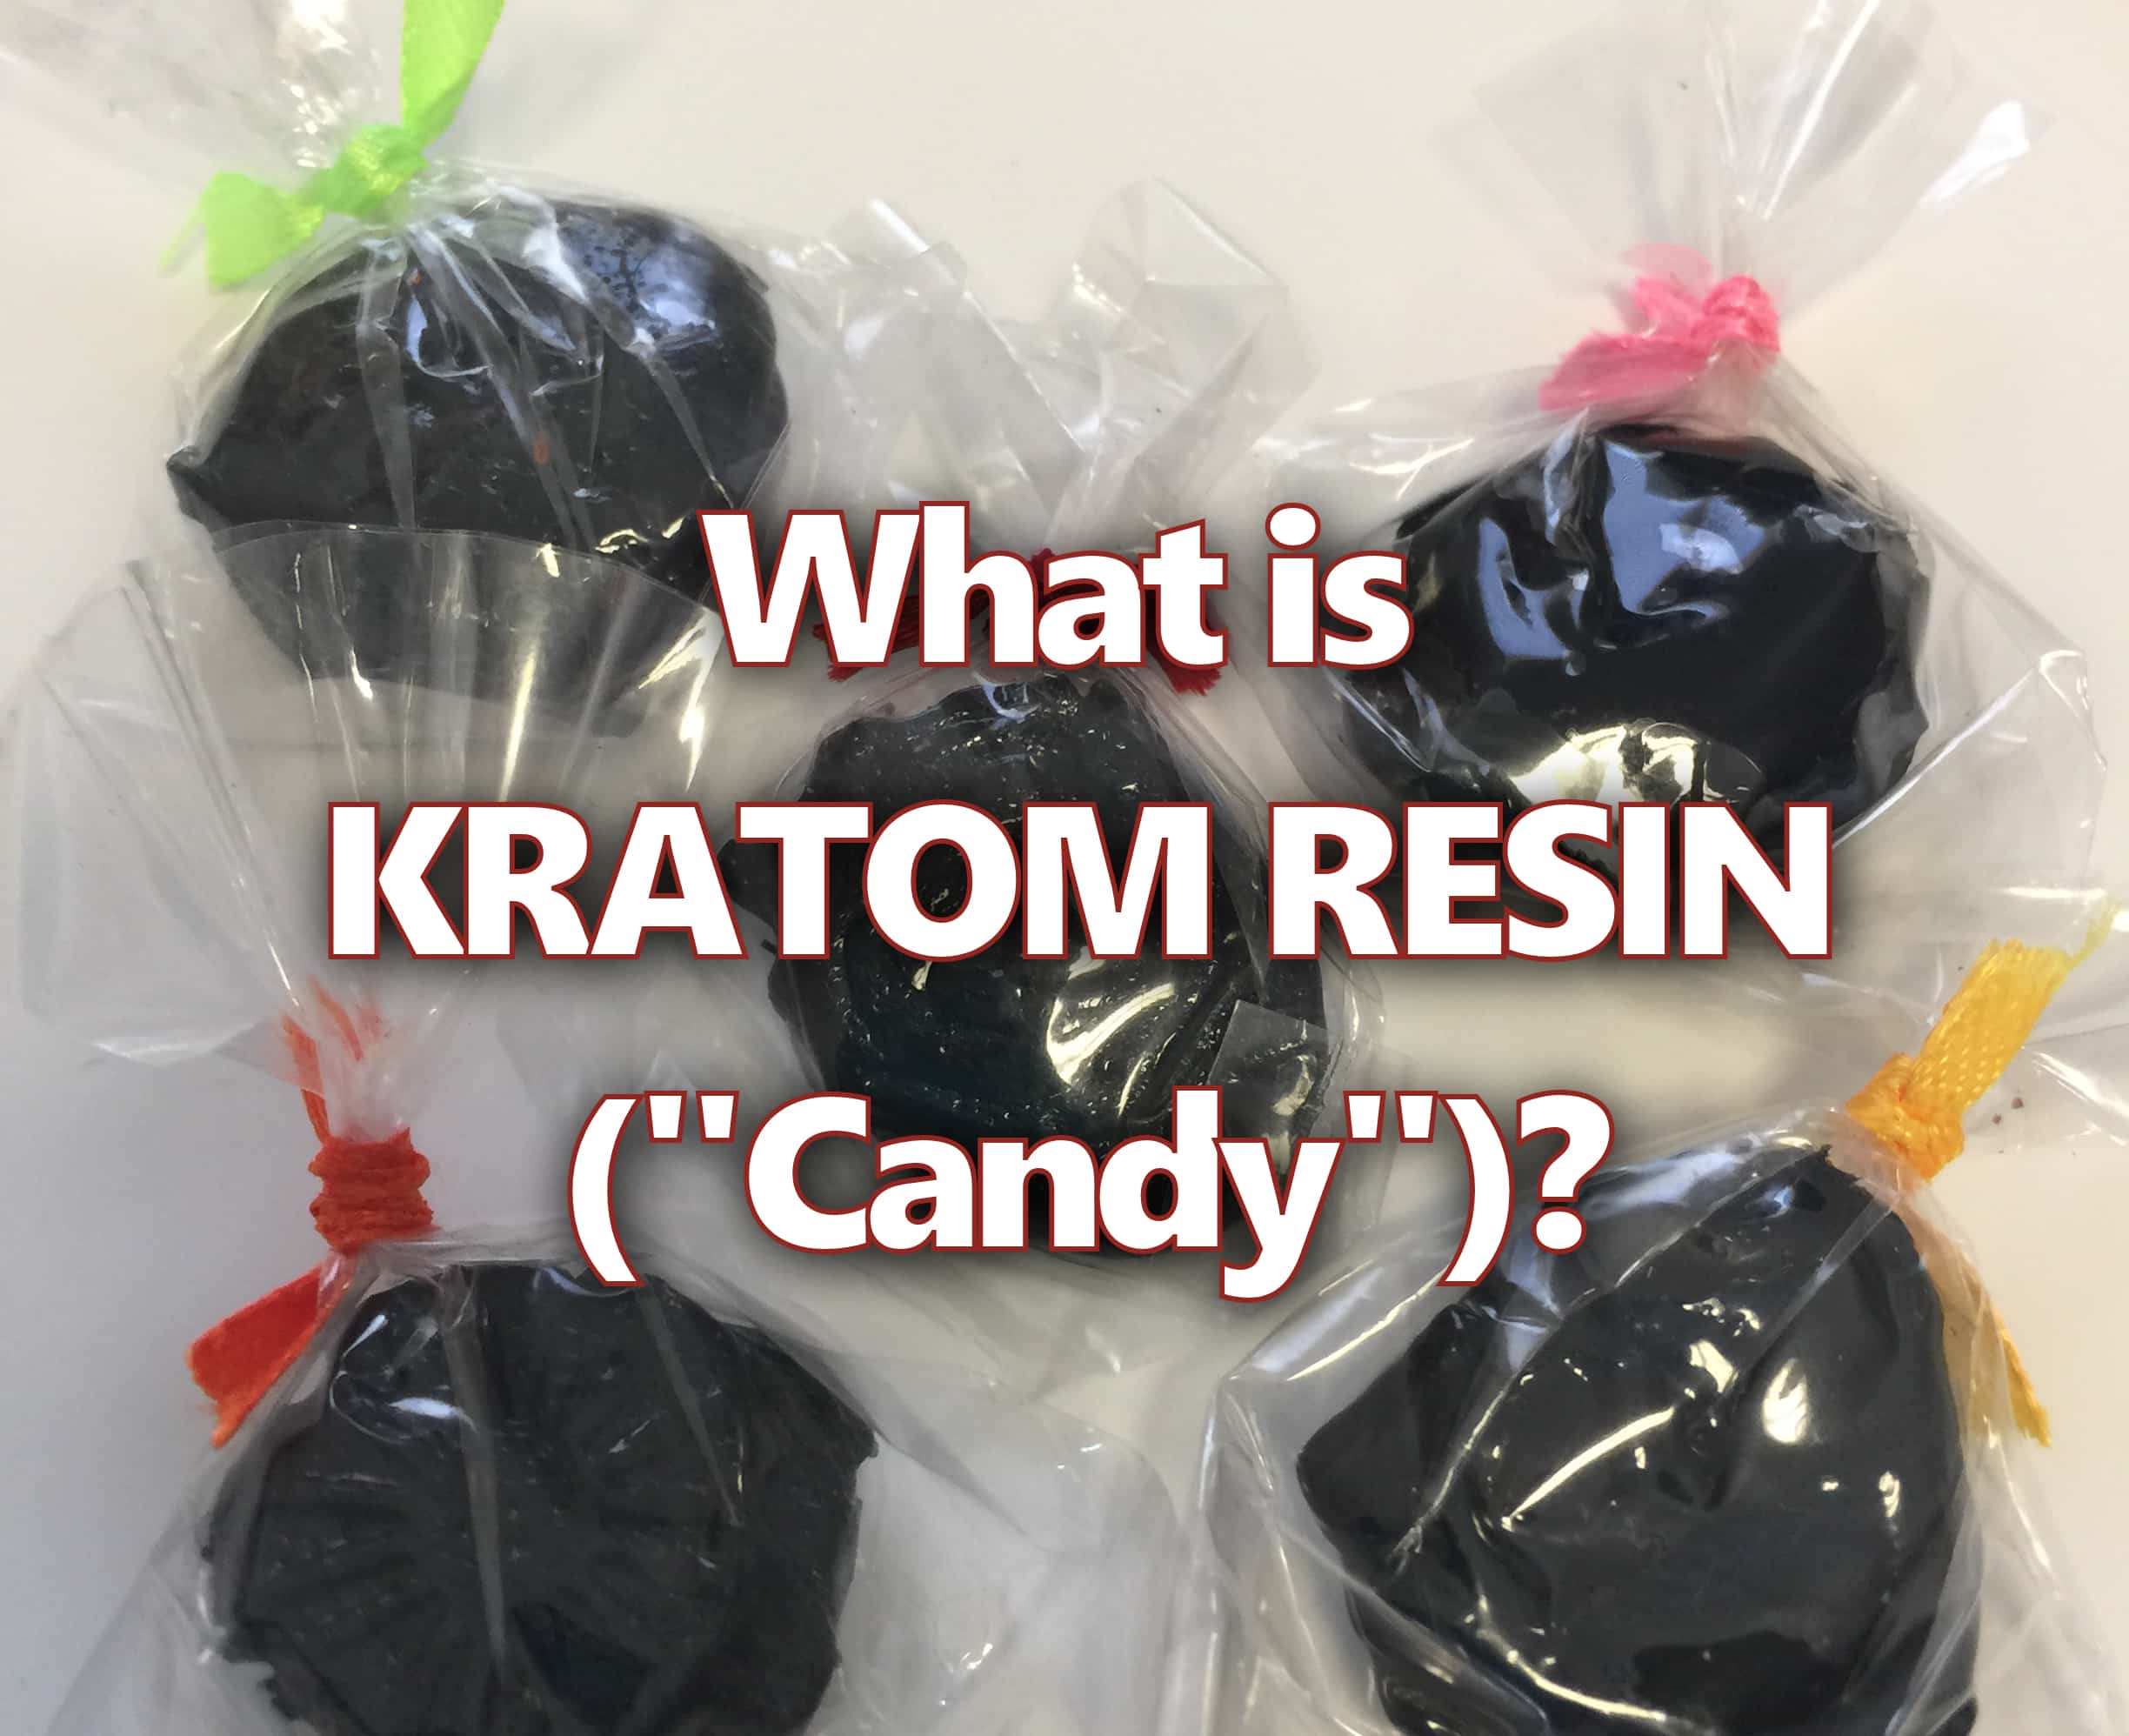 You are currently viewing What is Kratom Resin (“Candy”)?